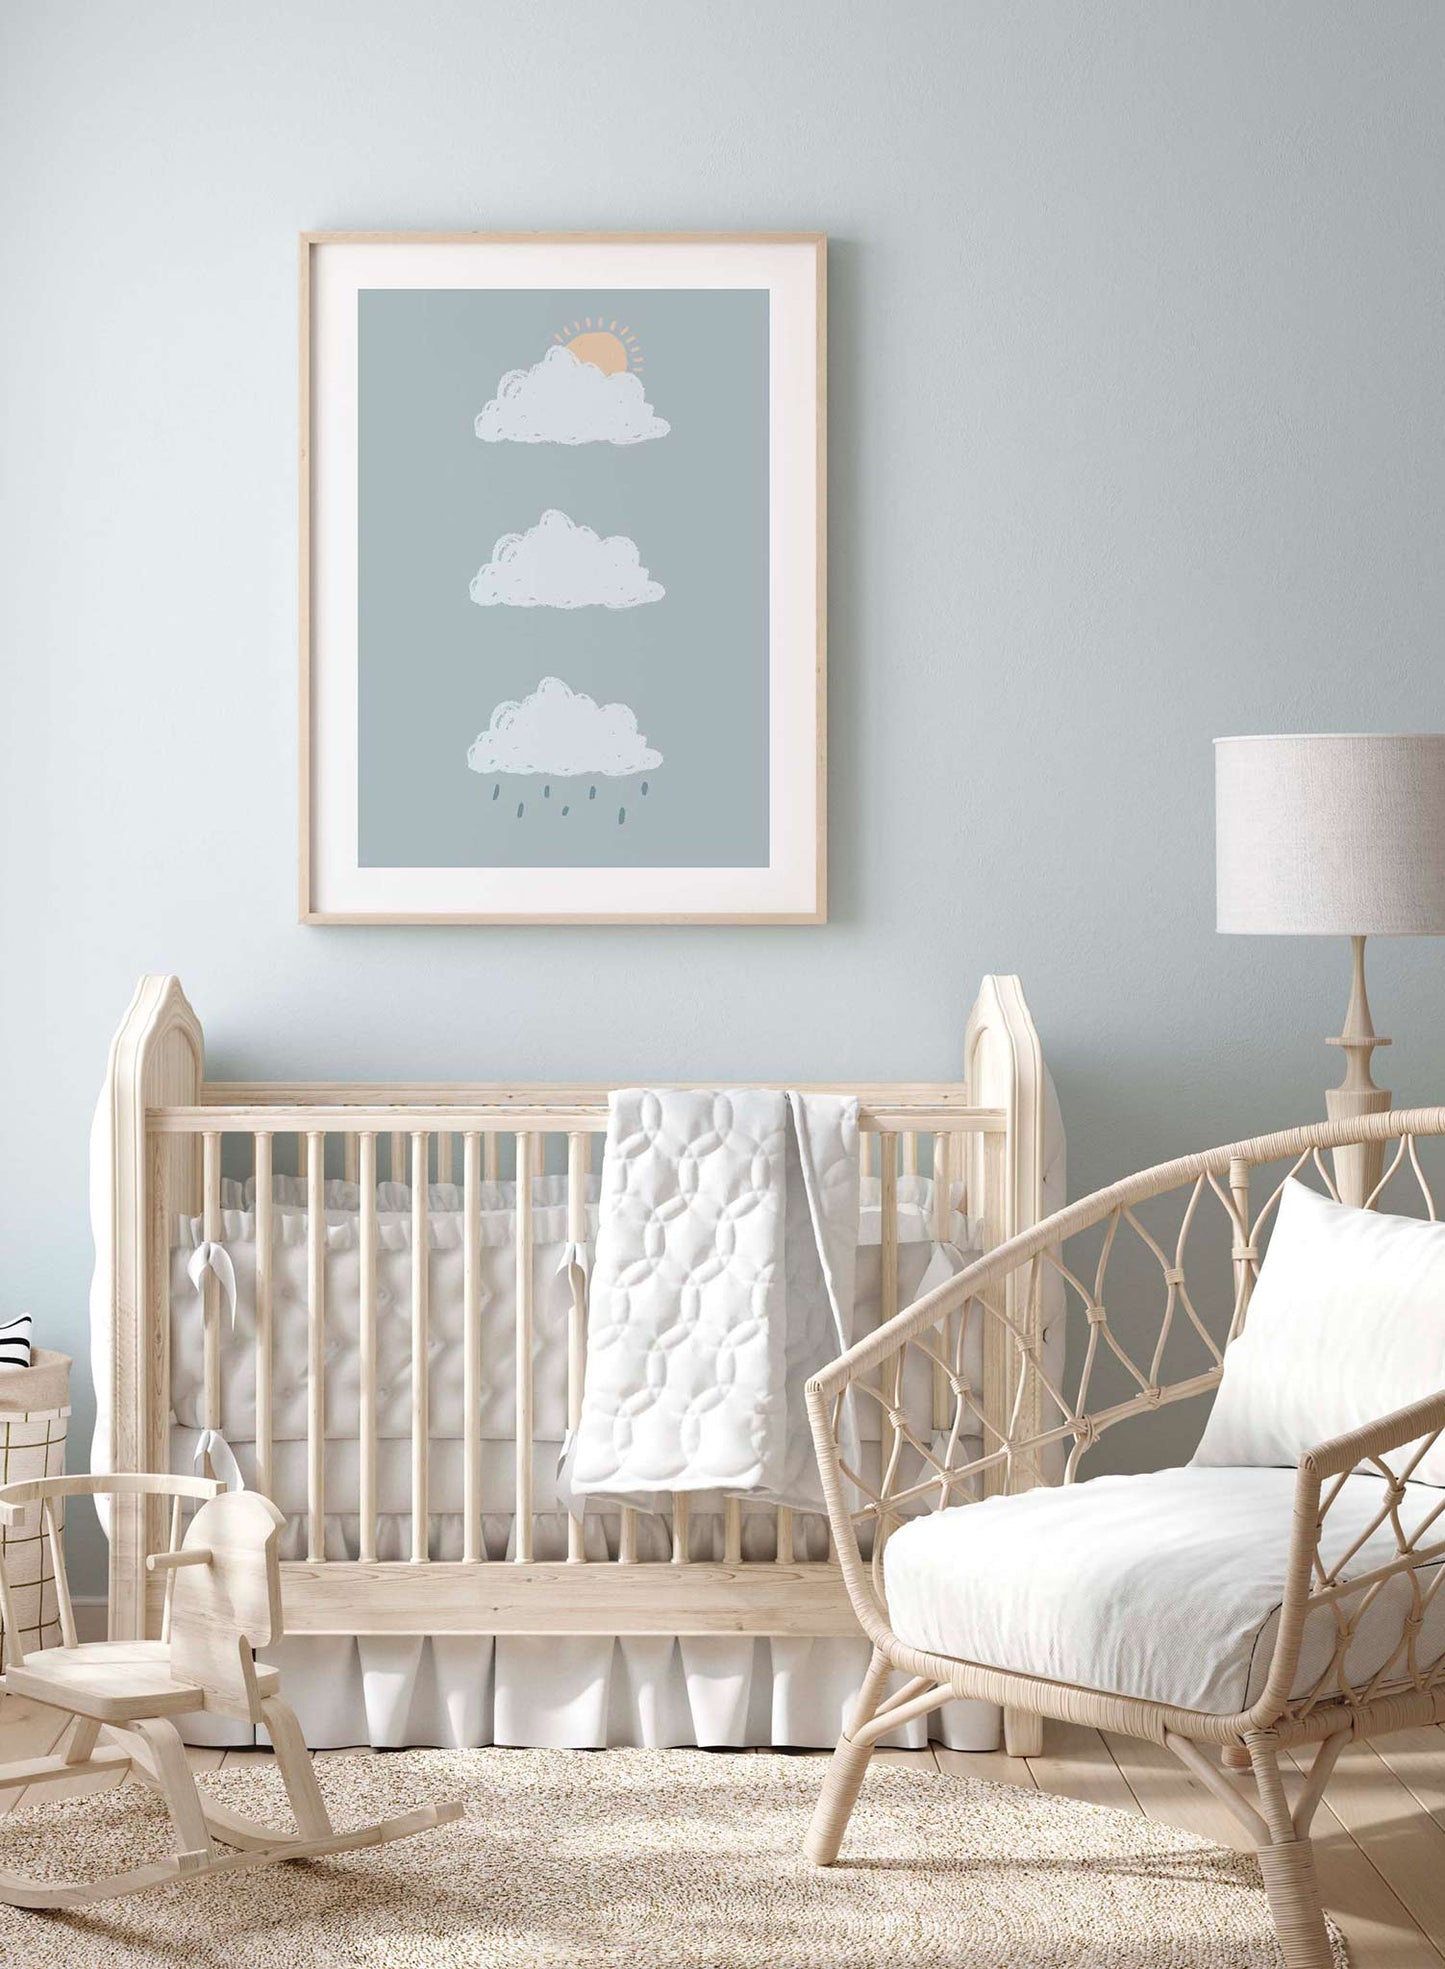 Moody Clouds is a minimalist illustration by Opposite Wall of three different cloud patterns: sunny, cloudy and rainy. 